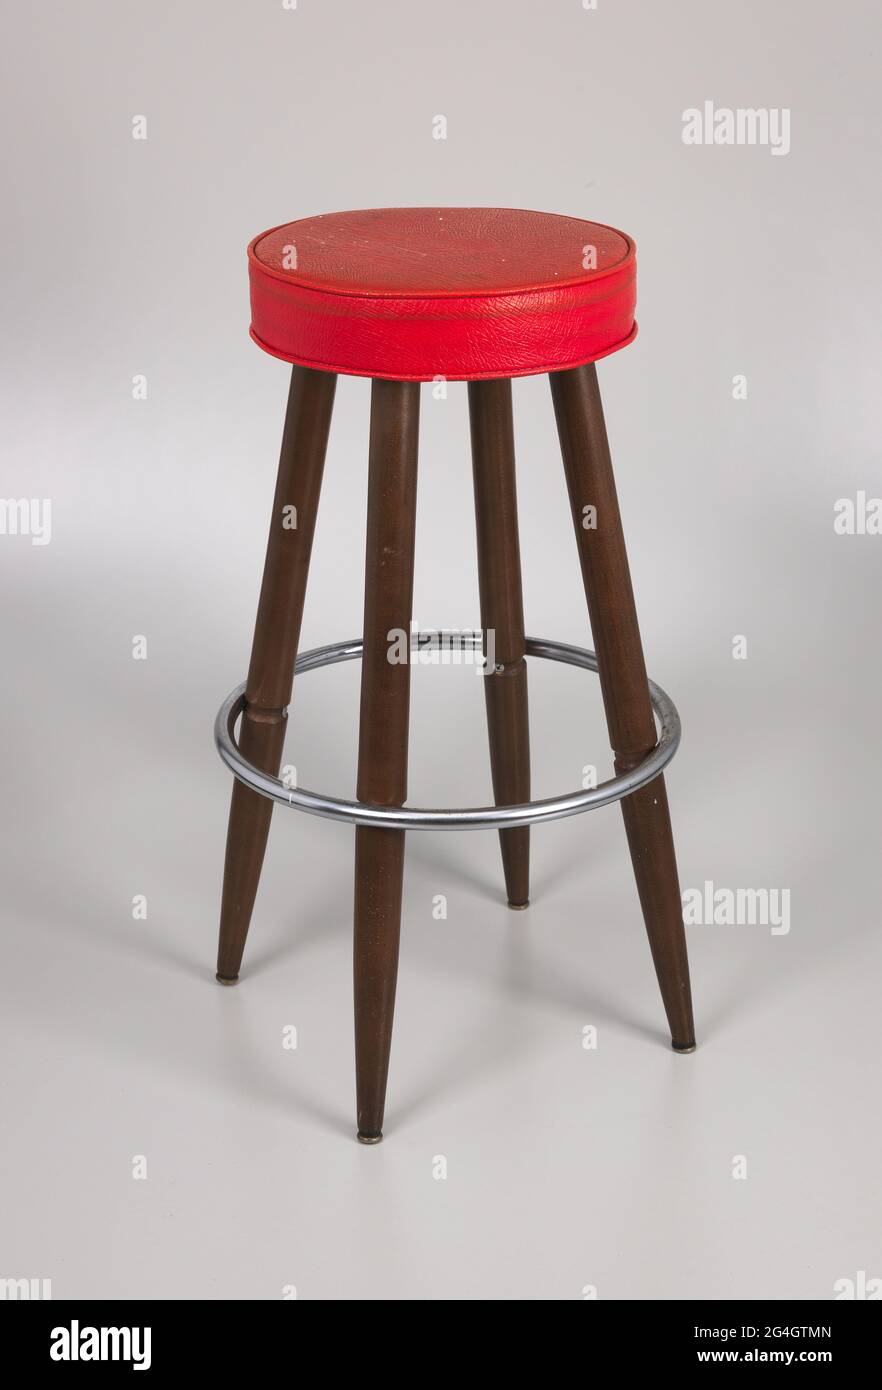 A wood barstool with a red vinyl seat. The seat of the stool is thick foam covered by red vinyl that is stapled to a particle board seat base. The stool has four legs made of lathe-shaped wood, with each leg tapering at the tip and finished with a metal cap. The legs bolt into the underside of the seat, so that the seat does not swivel. 1 foot up from the ground, a circle of metal is attached horizontally to the stool legs, which serves as a foot rest. The metal circle attaches to each leg by one long metal screw that runs through each leg and screws into the metal. Stock Photo